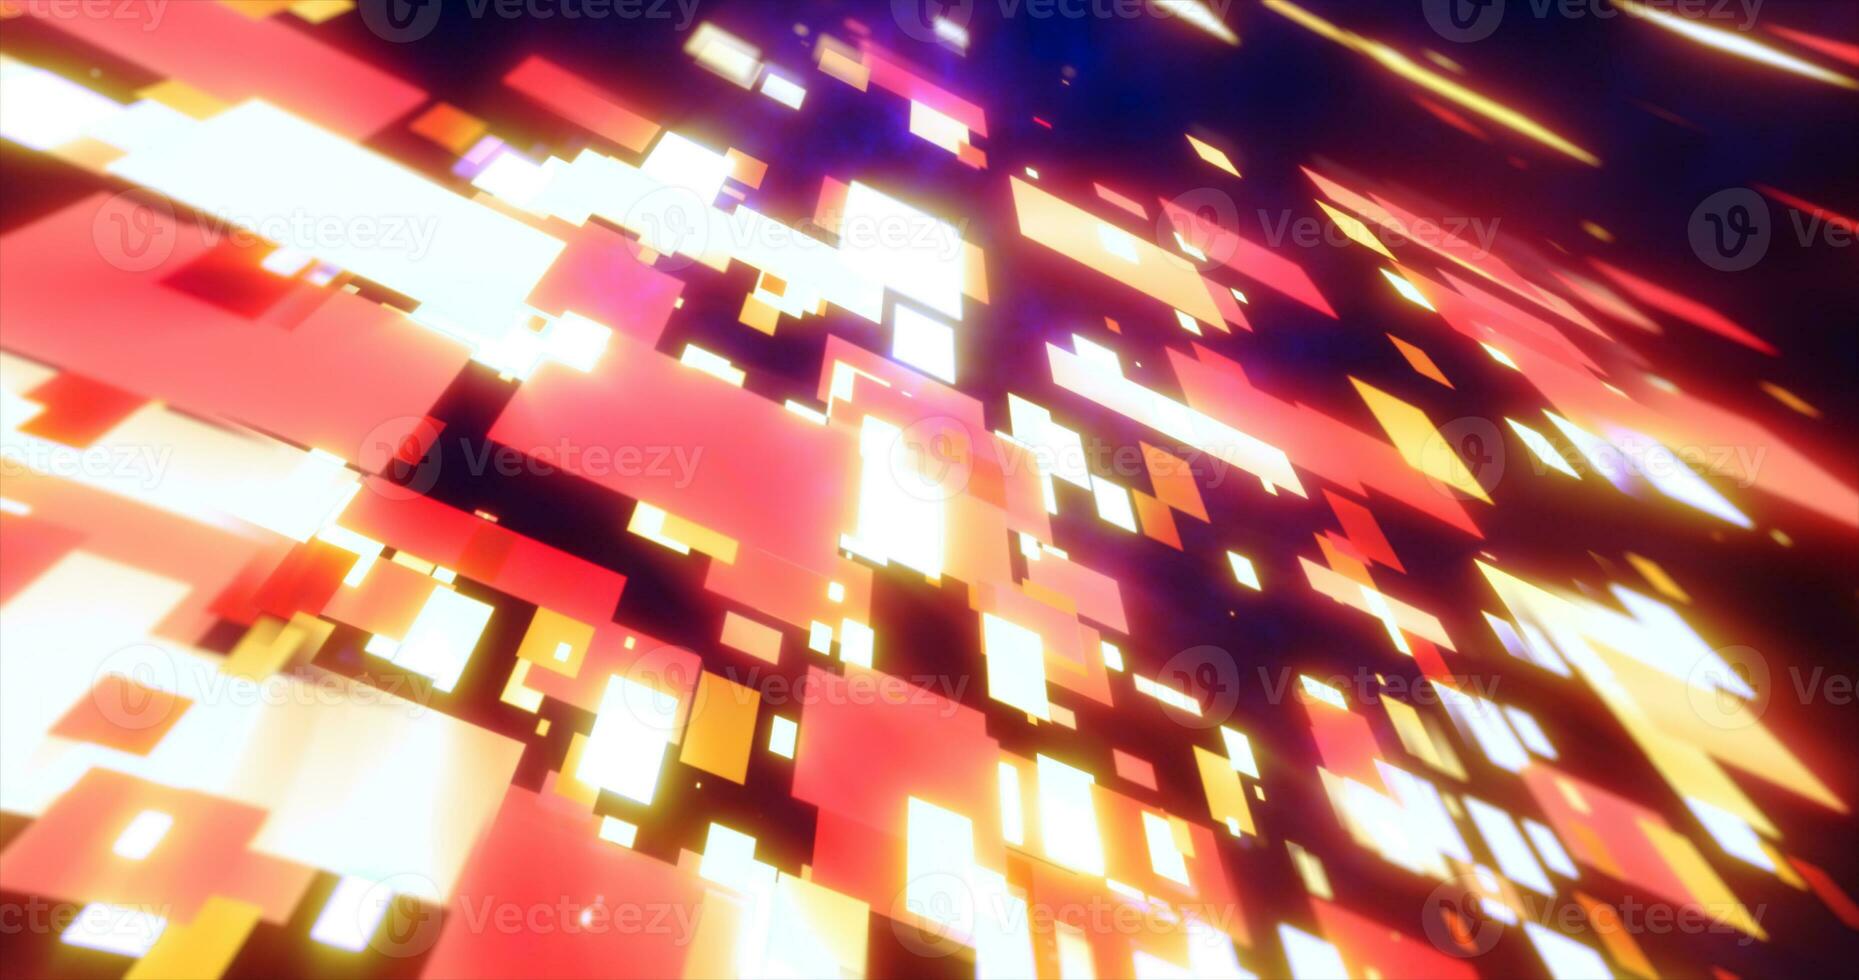 Orange energy squares and rectangles particles magic glowing hi-tech futuristic abstract background photo